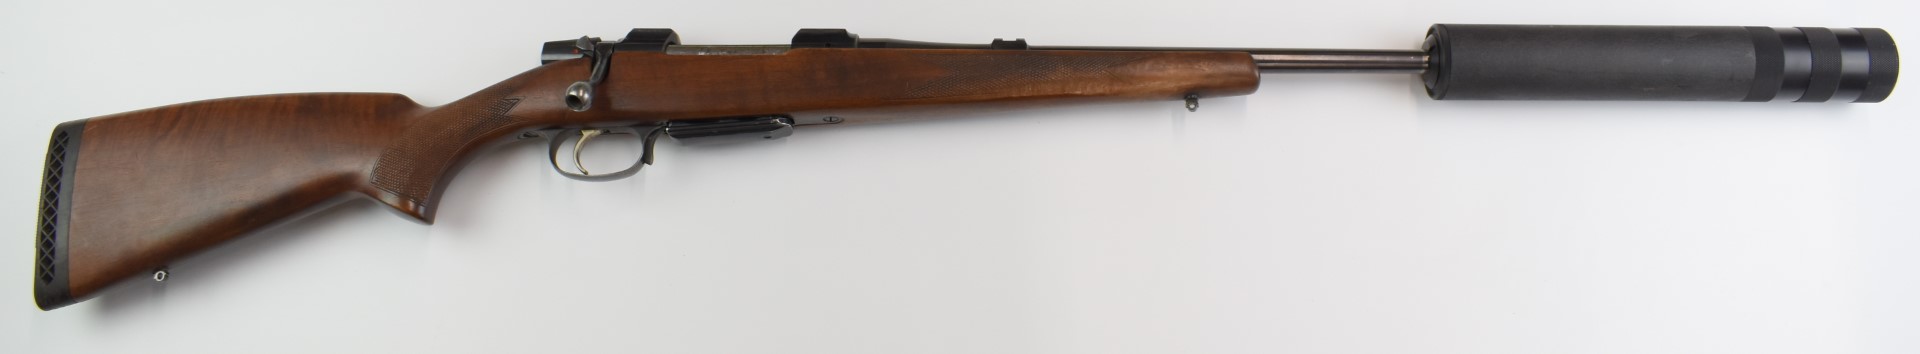 BRNO CZ 537 .243 bolt-action rifle with chequered semi-pistol grip and forend, raised cheek-piece, - Image 3 of 20